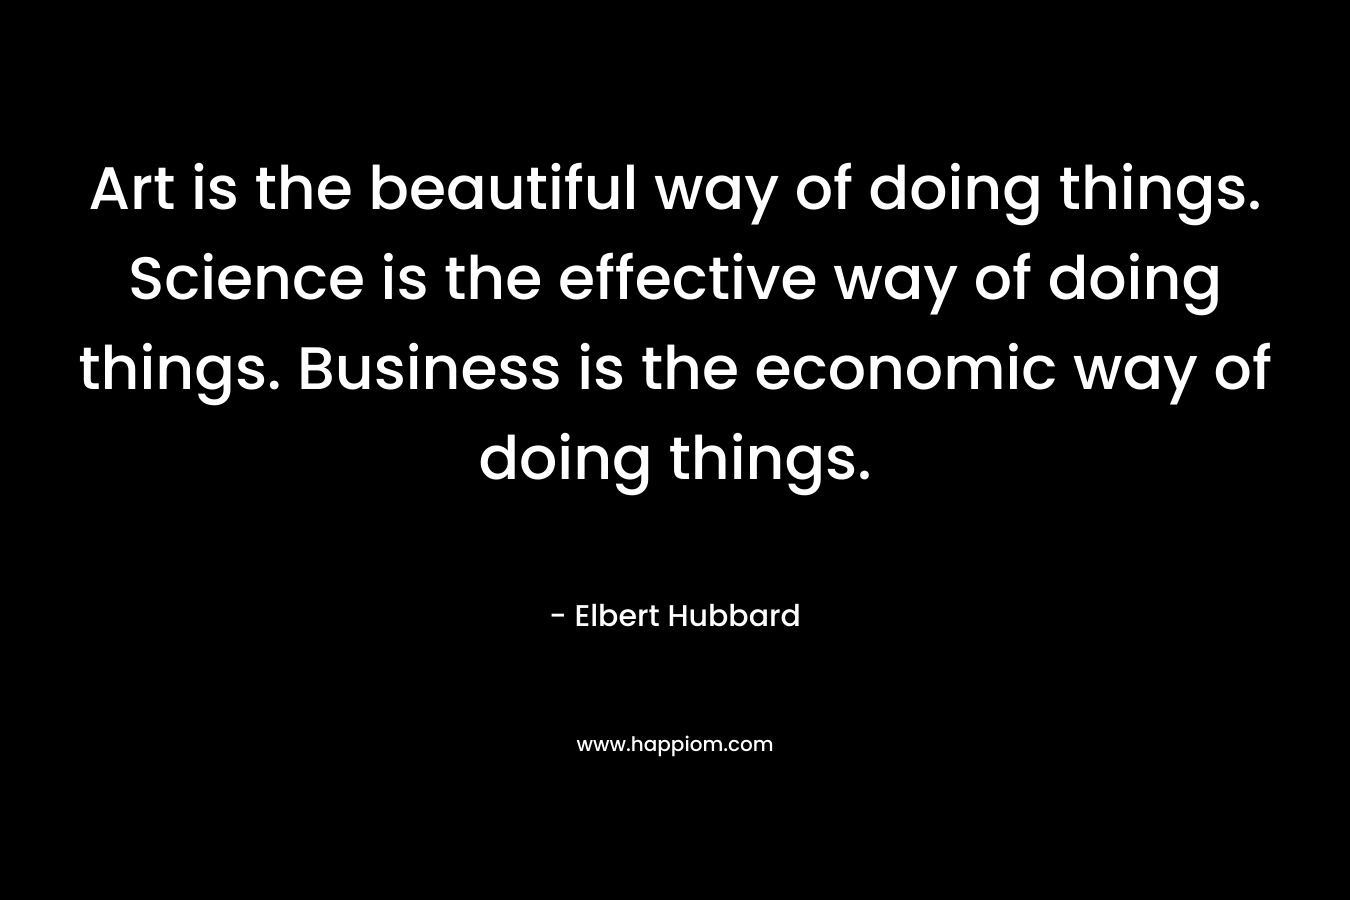 Art is the beautiful way of doing things. Science is the effective way of doing things. Business is the economic way of doing things.